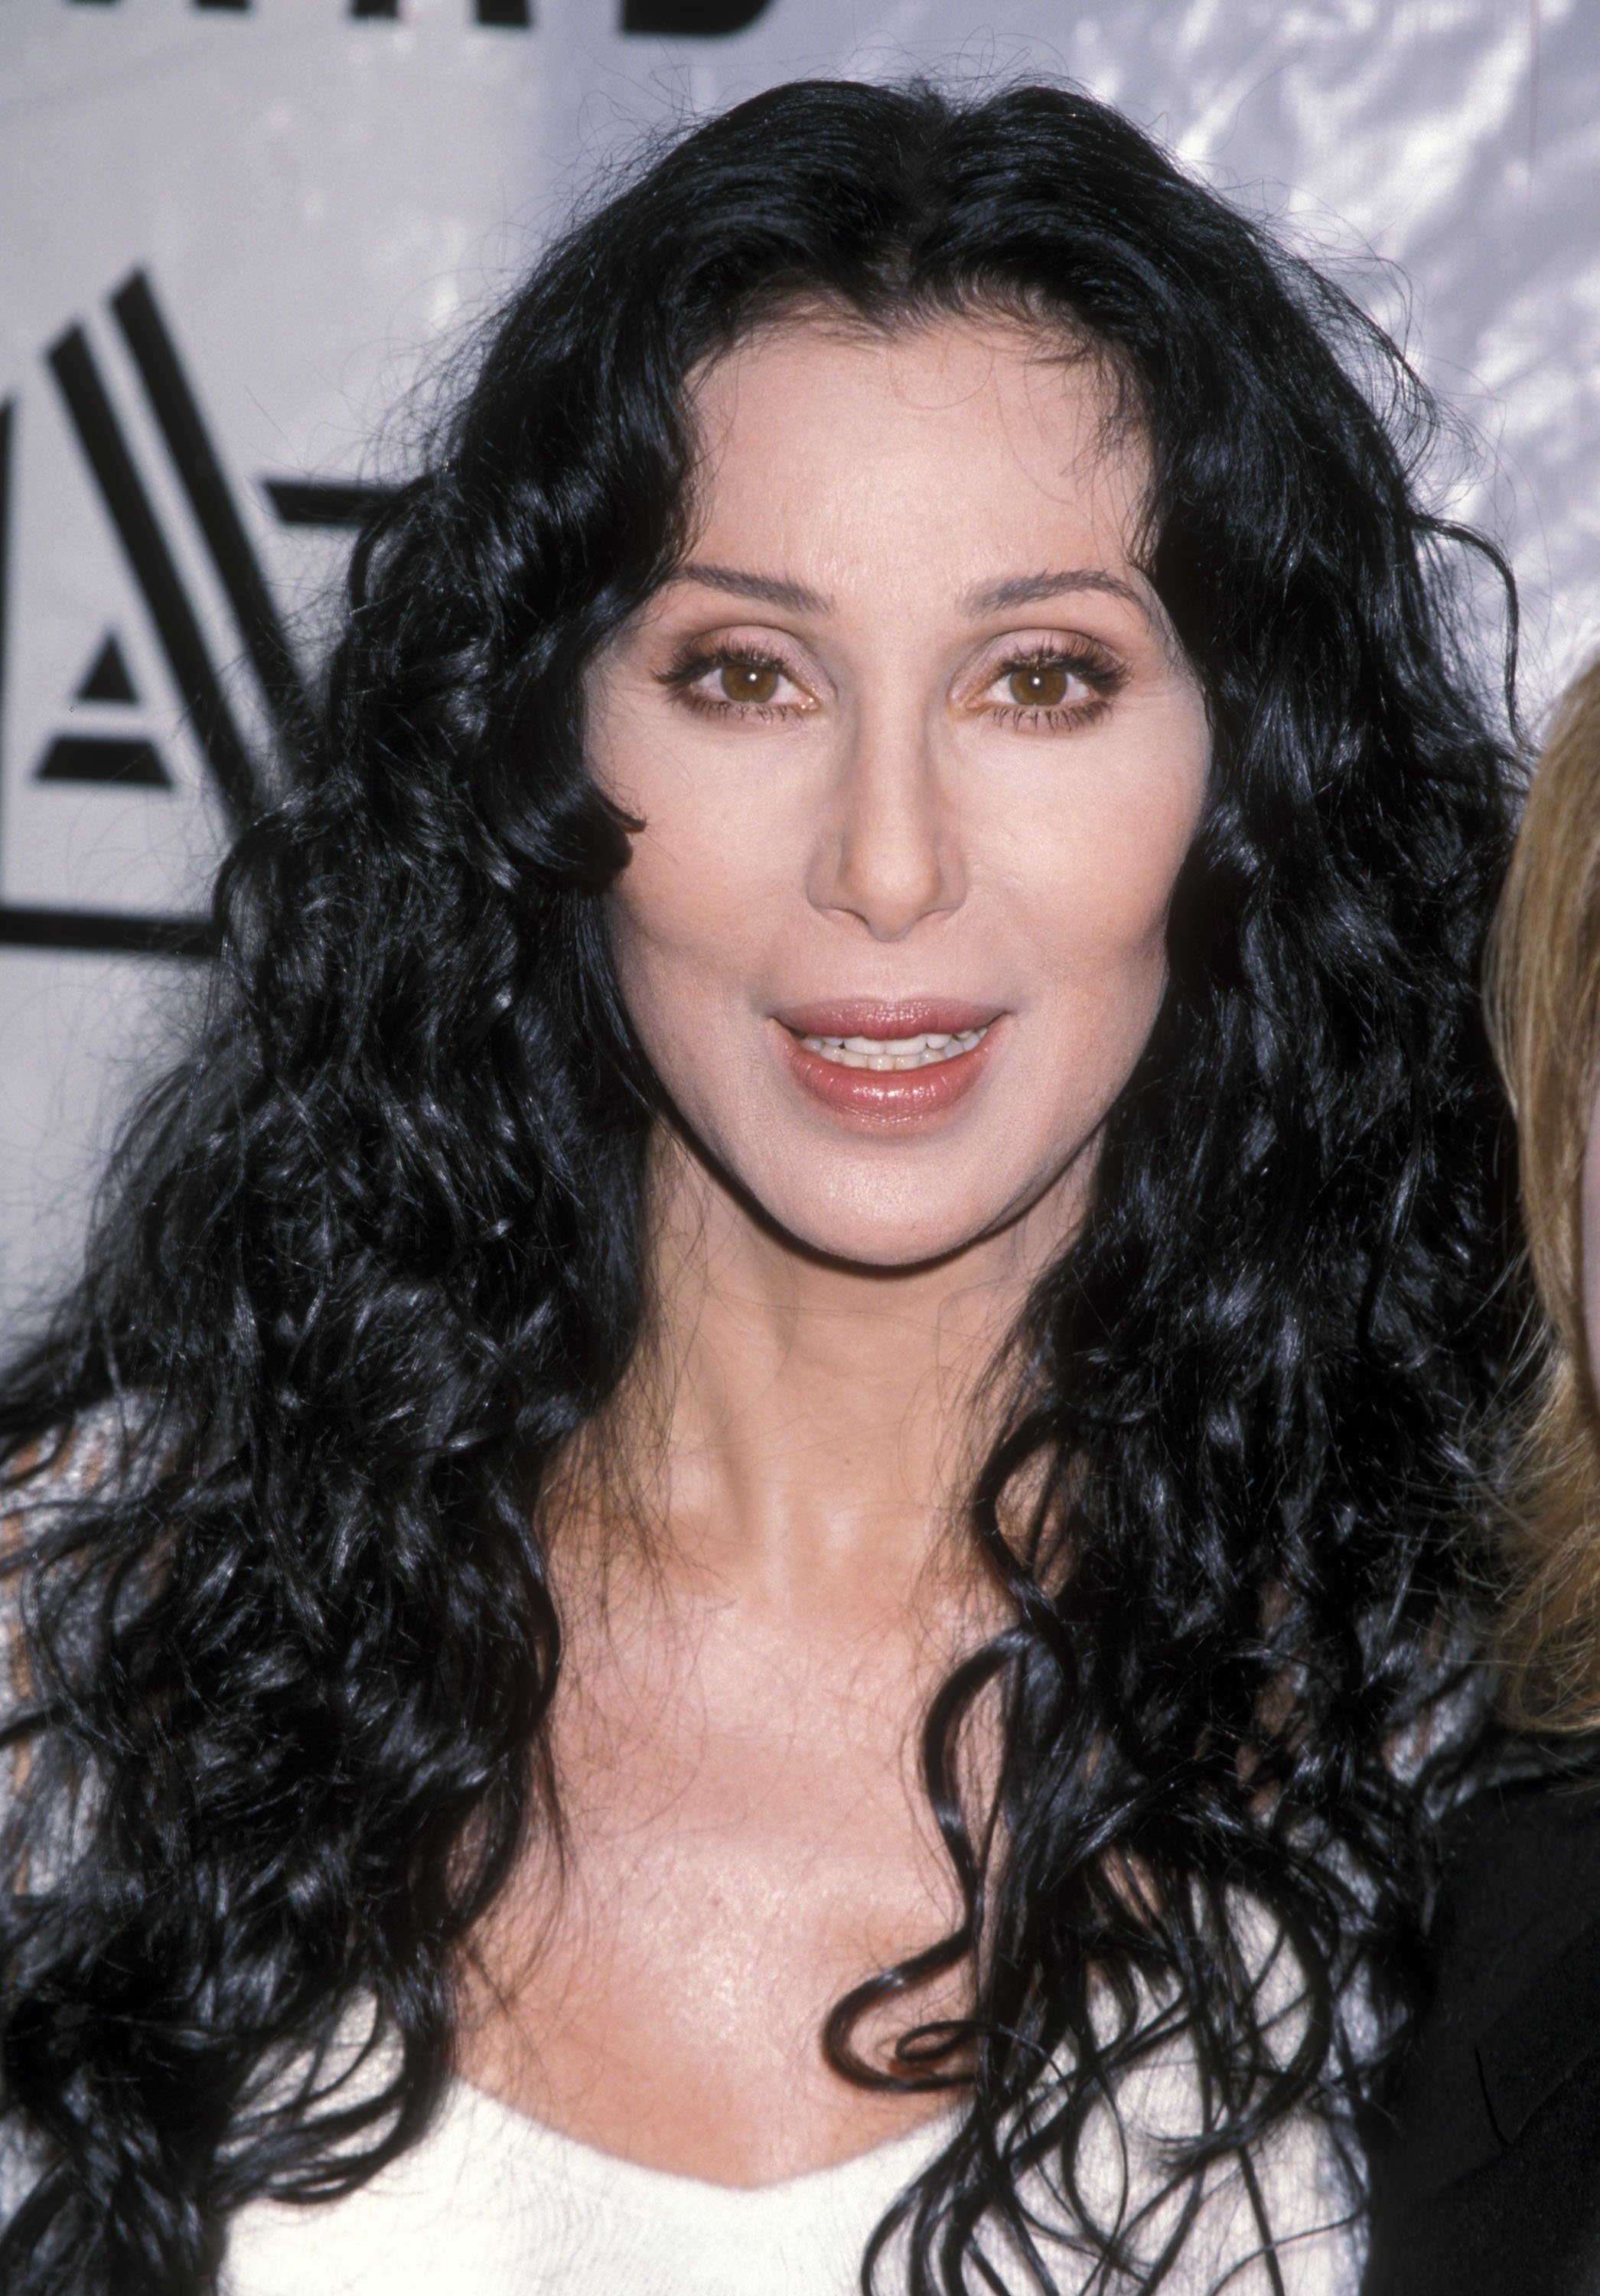 Singer/Actress Cher attends the Ninth Annual GLAAD Media Awards on April 19, 1998 at Century Plaza Hotel in Los Angeles, California. | Source: Getty Images